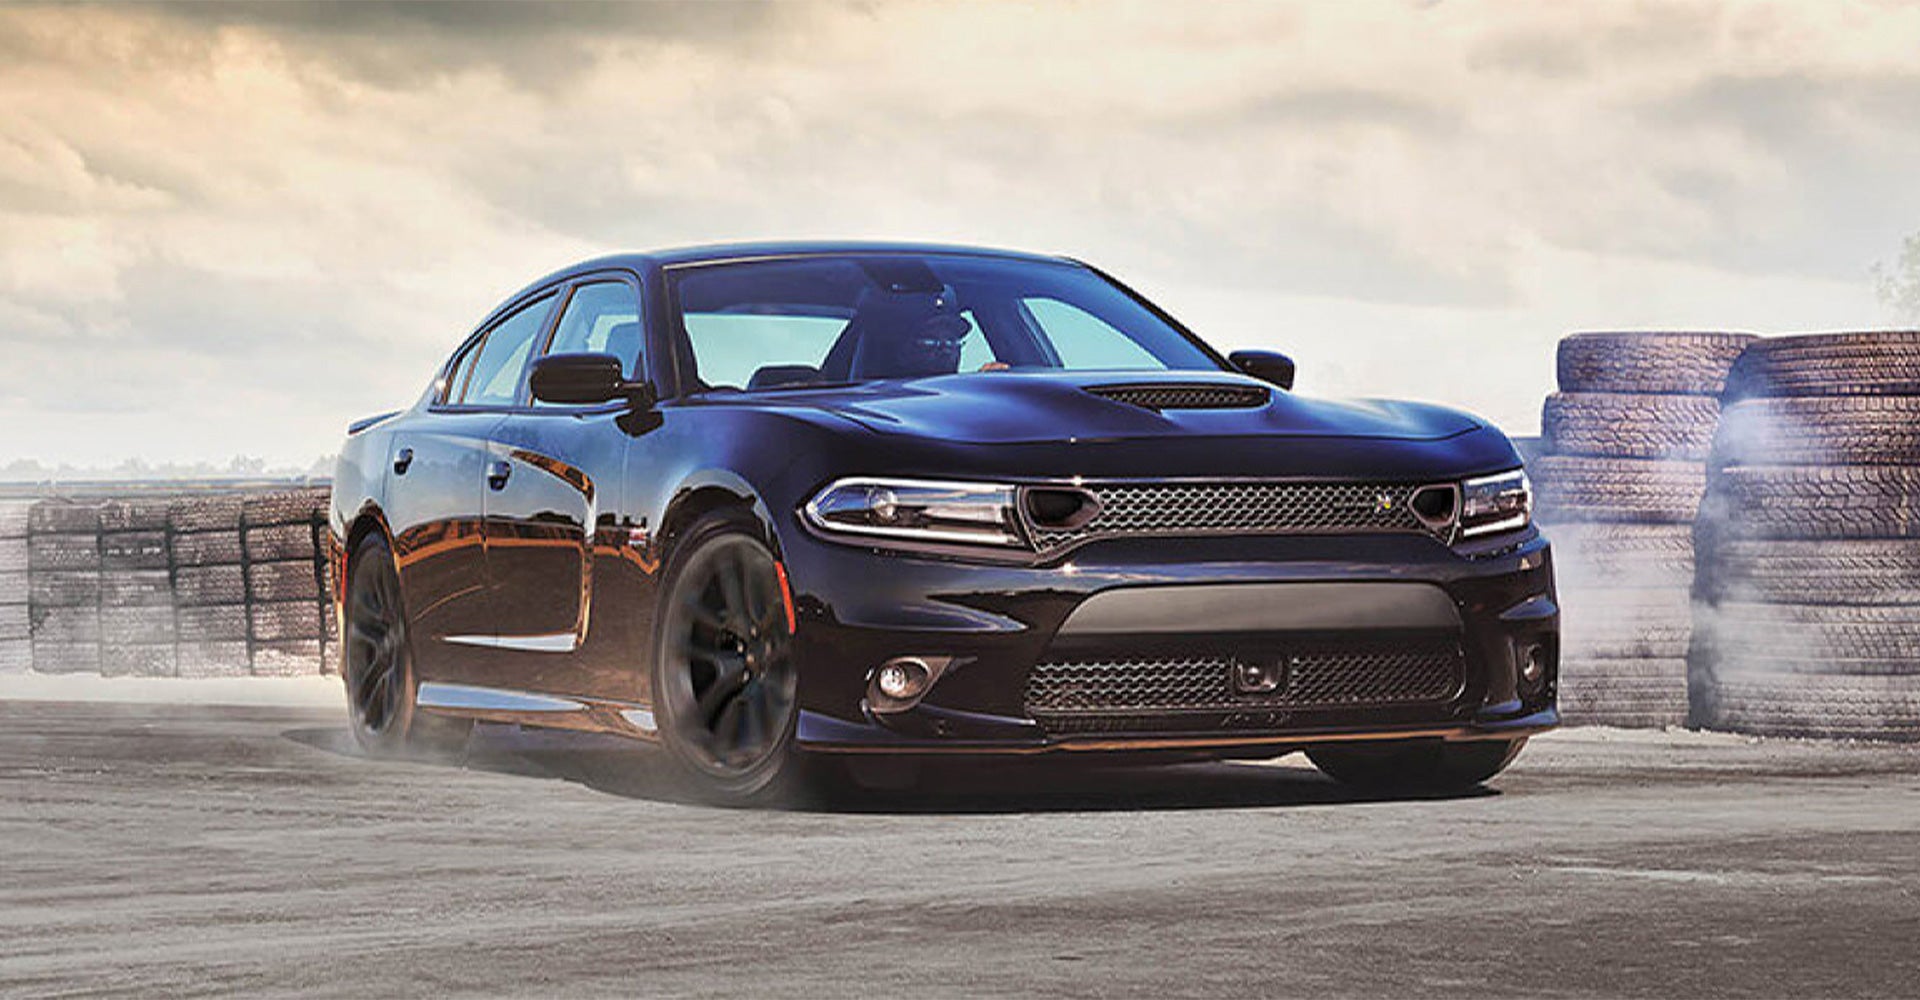 Used Dodge Charger For Sale in Wilmington, DE